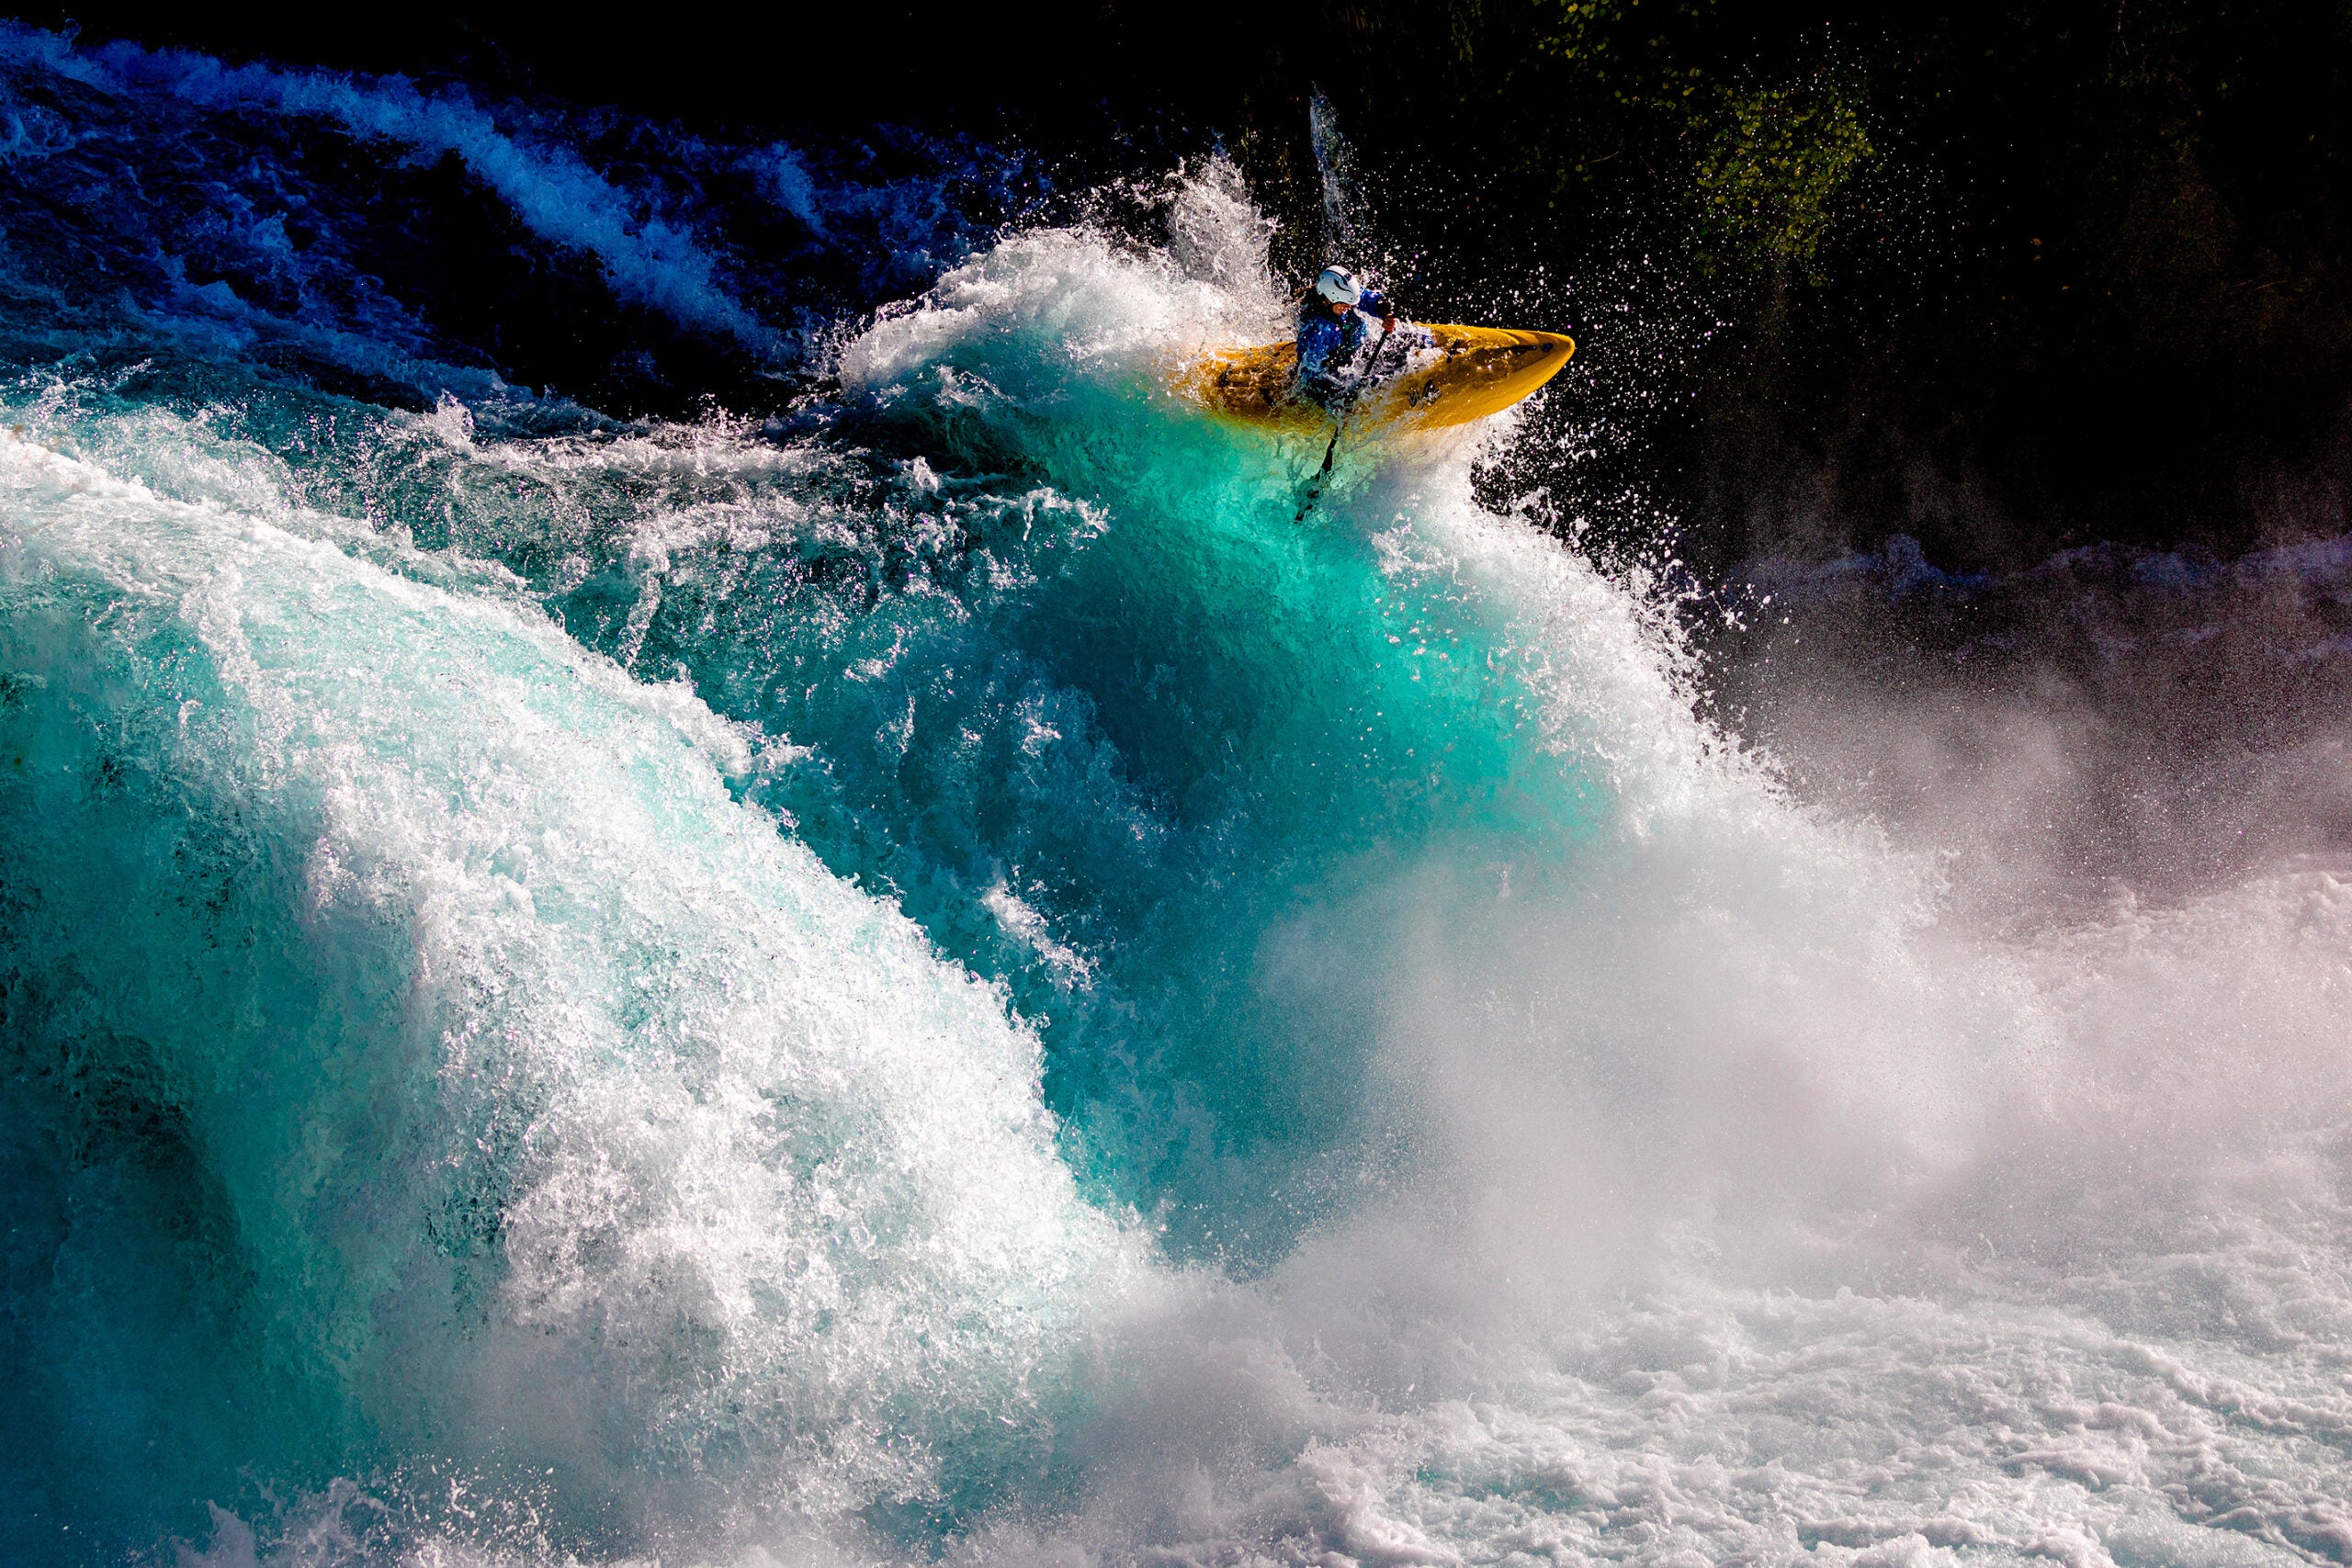 New Zealand photographer Rod Hill won in the Energy category for his photo, titled âHuka Falls,â which shows kayaker River Mutton dramatically emerging from a rapid at Huka Falls in New Zealand.